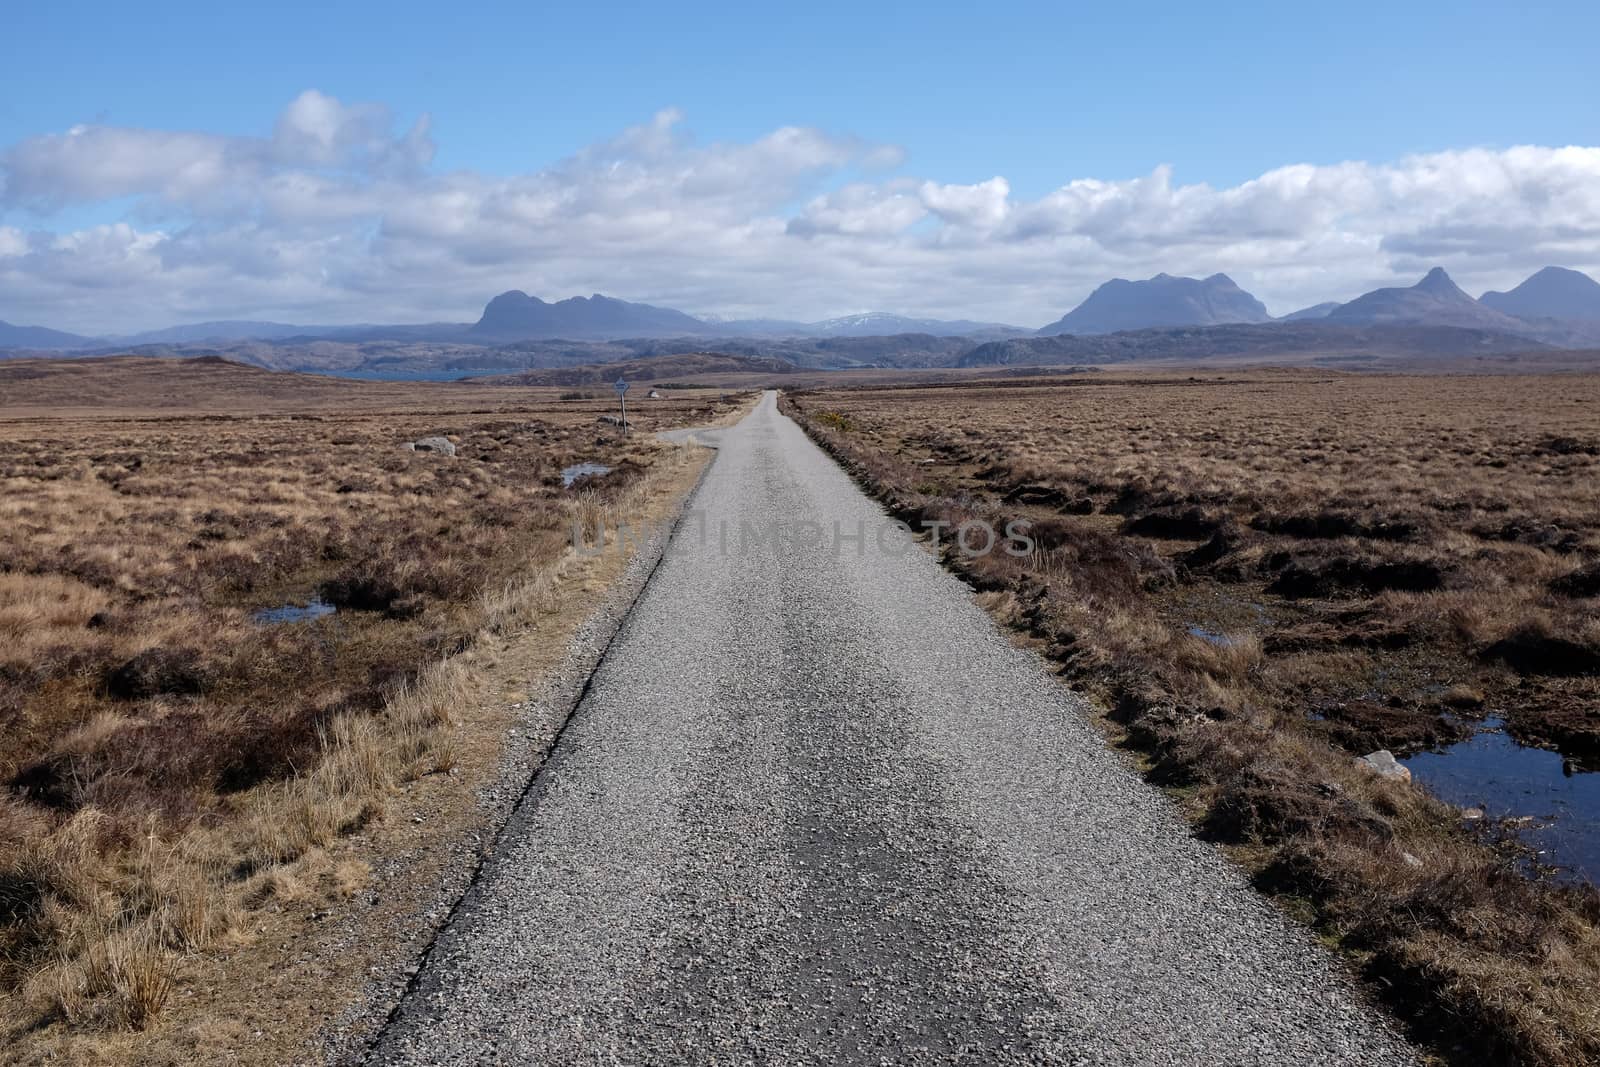 A tarmac single track road cuts through moorland towards the mountains on the horizon.